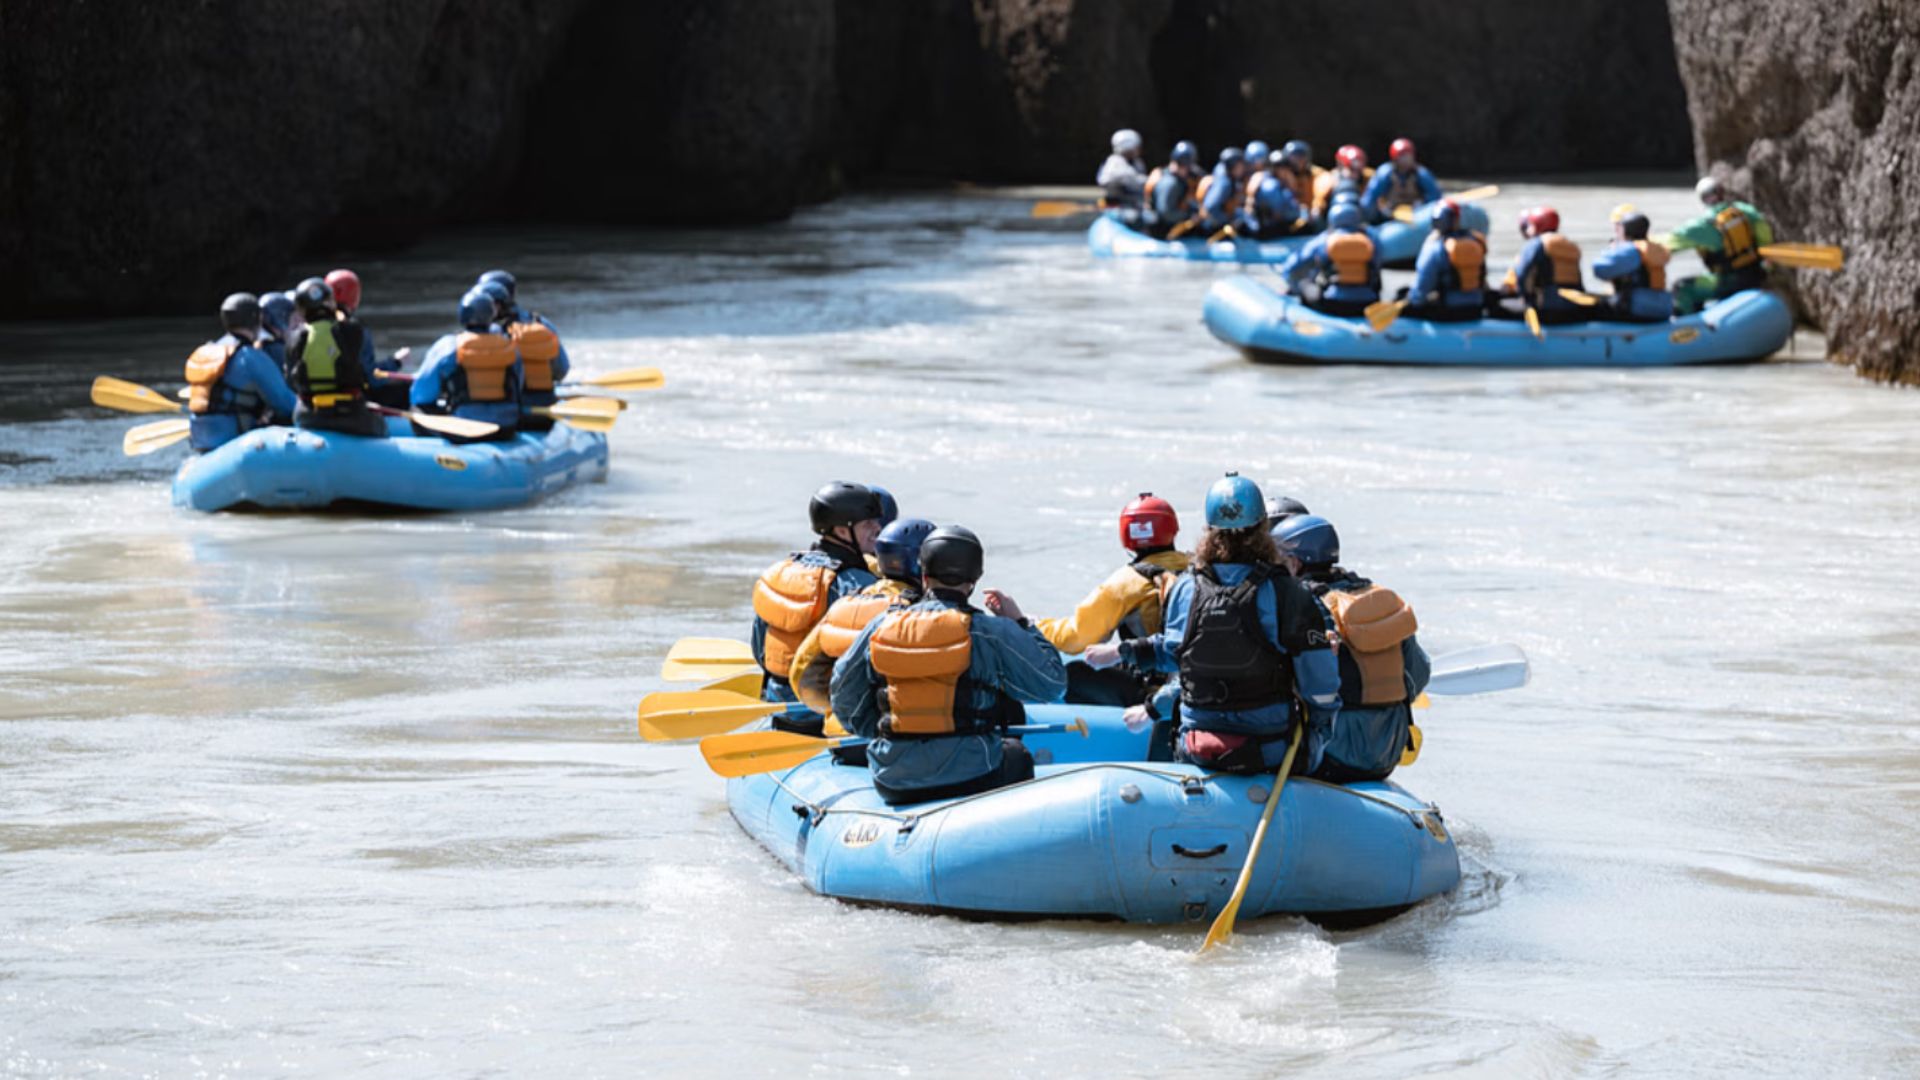 Rafting on the glacial river in the Golden Circle area in Iceland